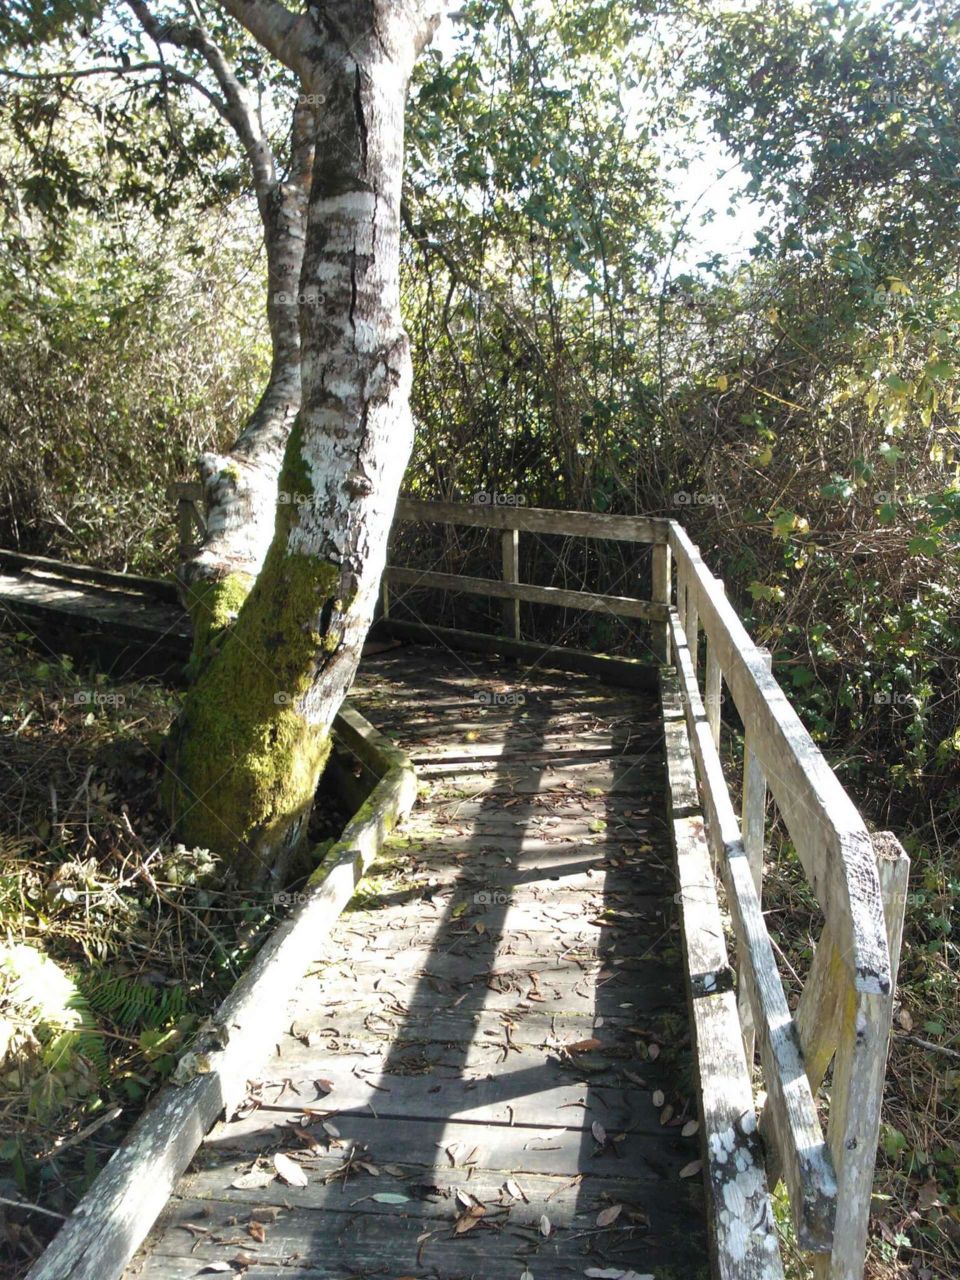 Do you think the fence holds back the flora, or just shows a turn in the path? (Fort Bragg, CA)